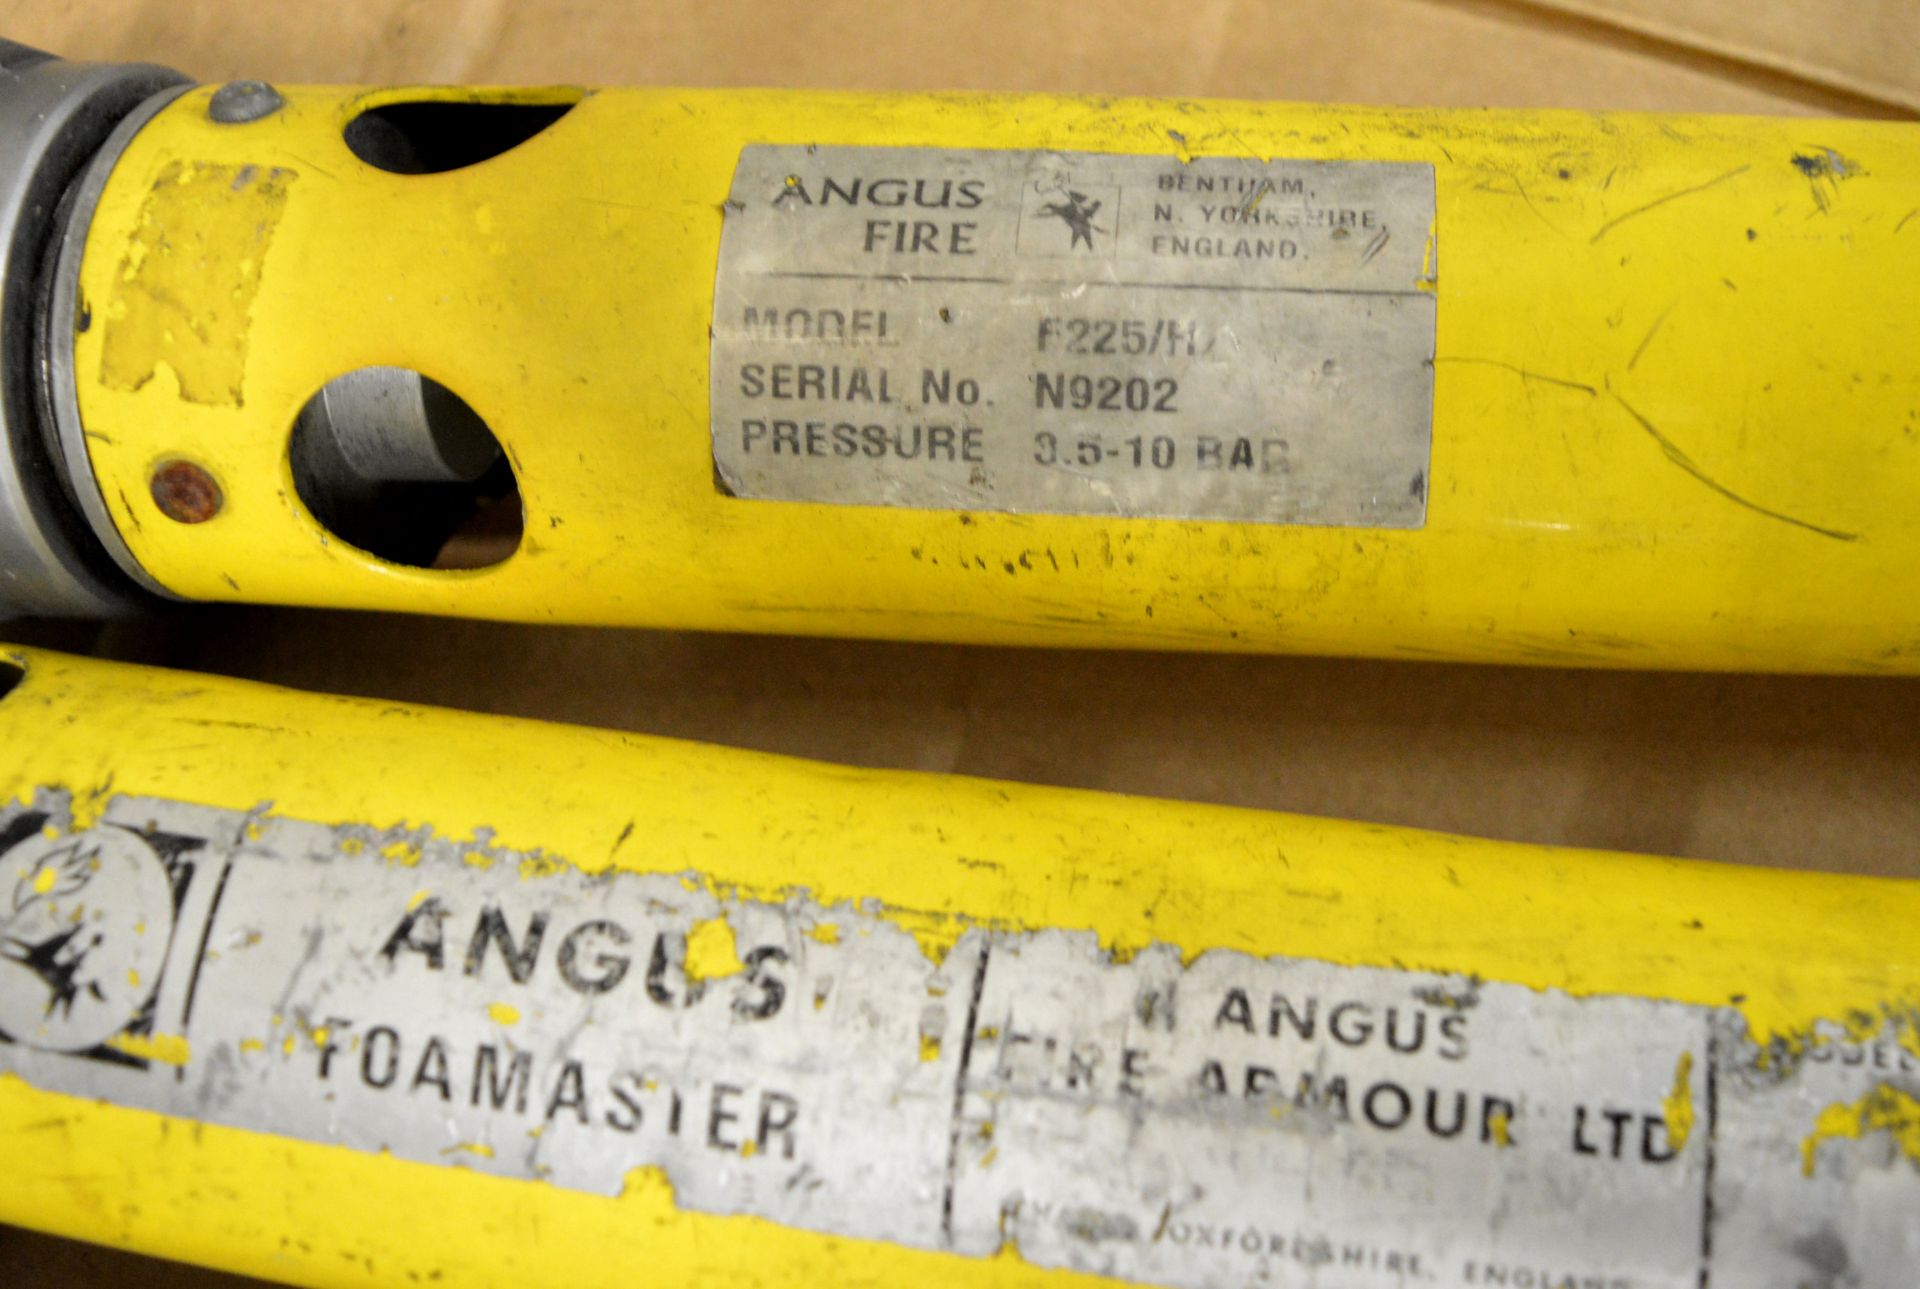 6x Angus Foamaster Nozzles. - Image 3 of 3